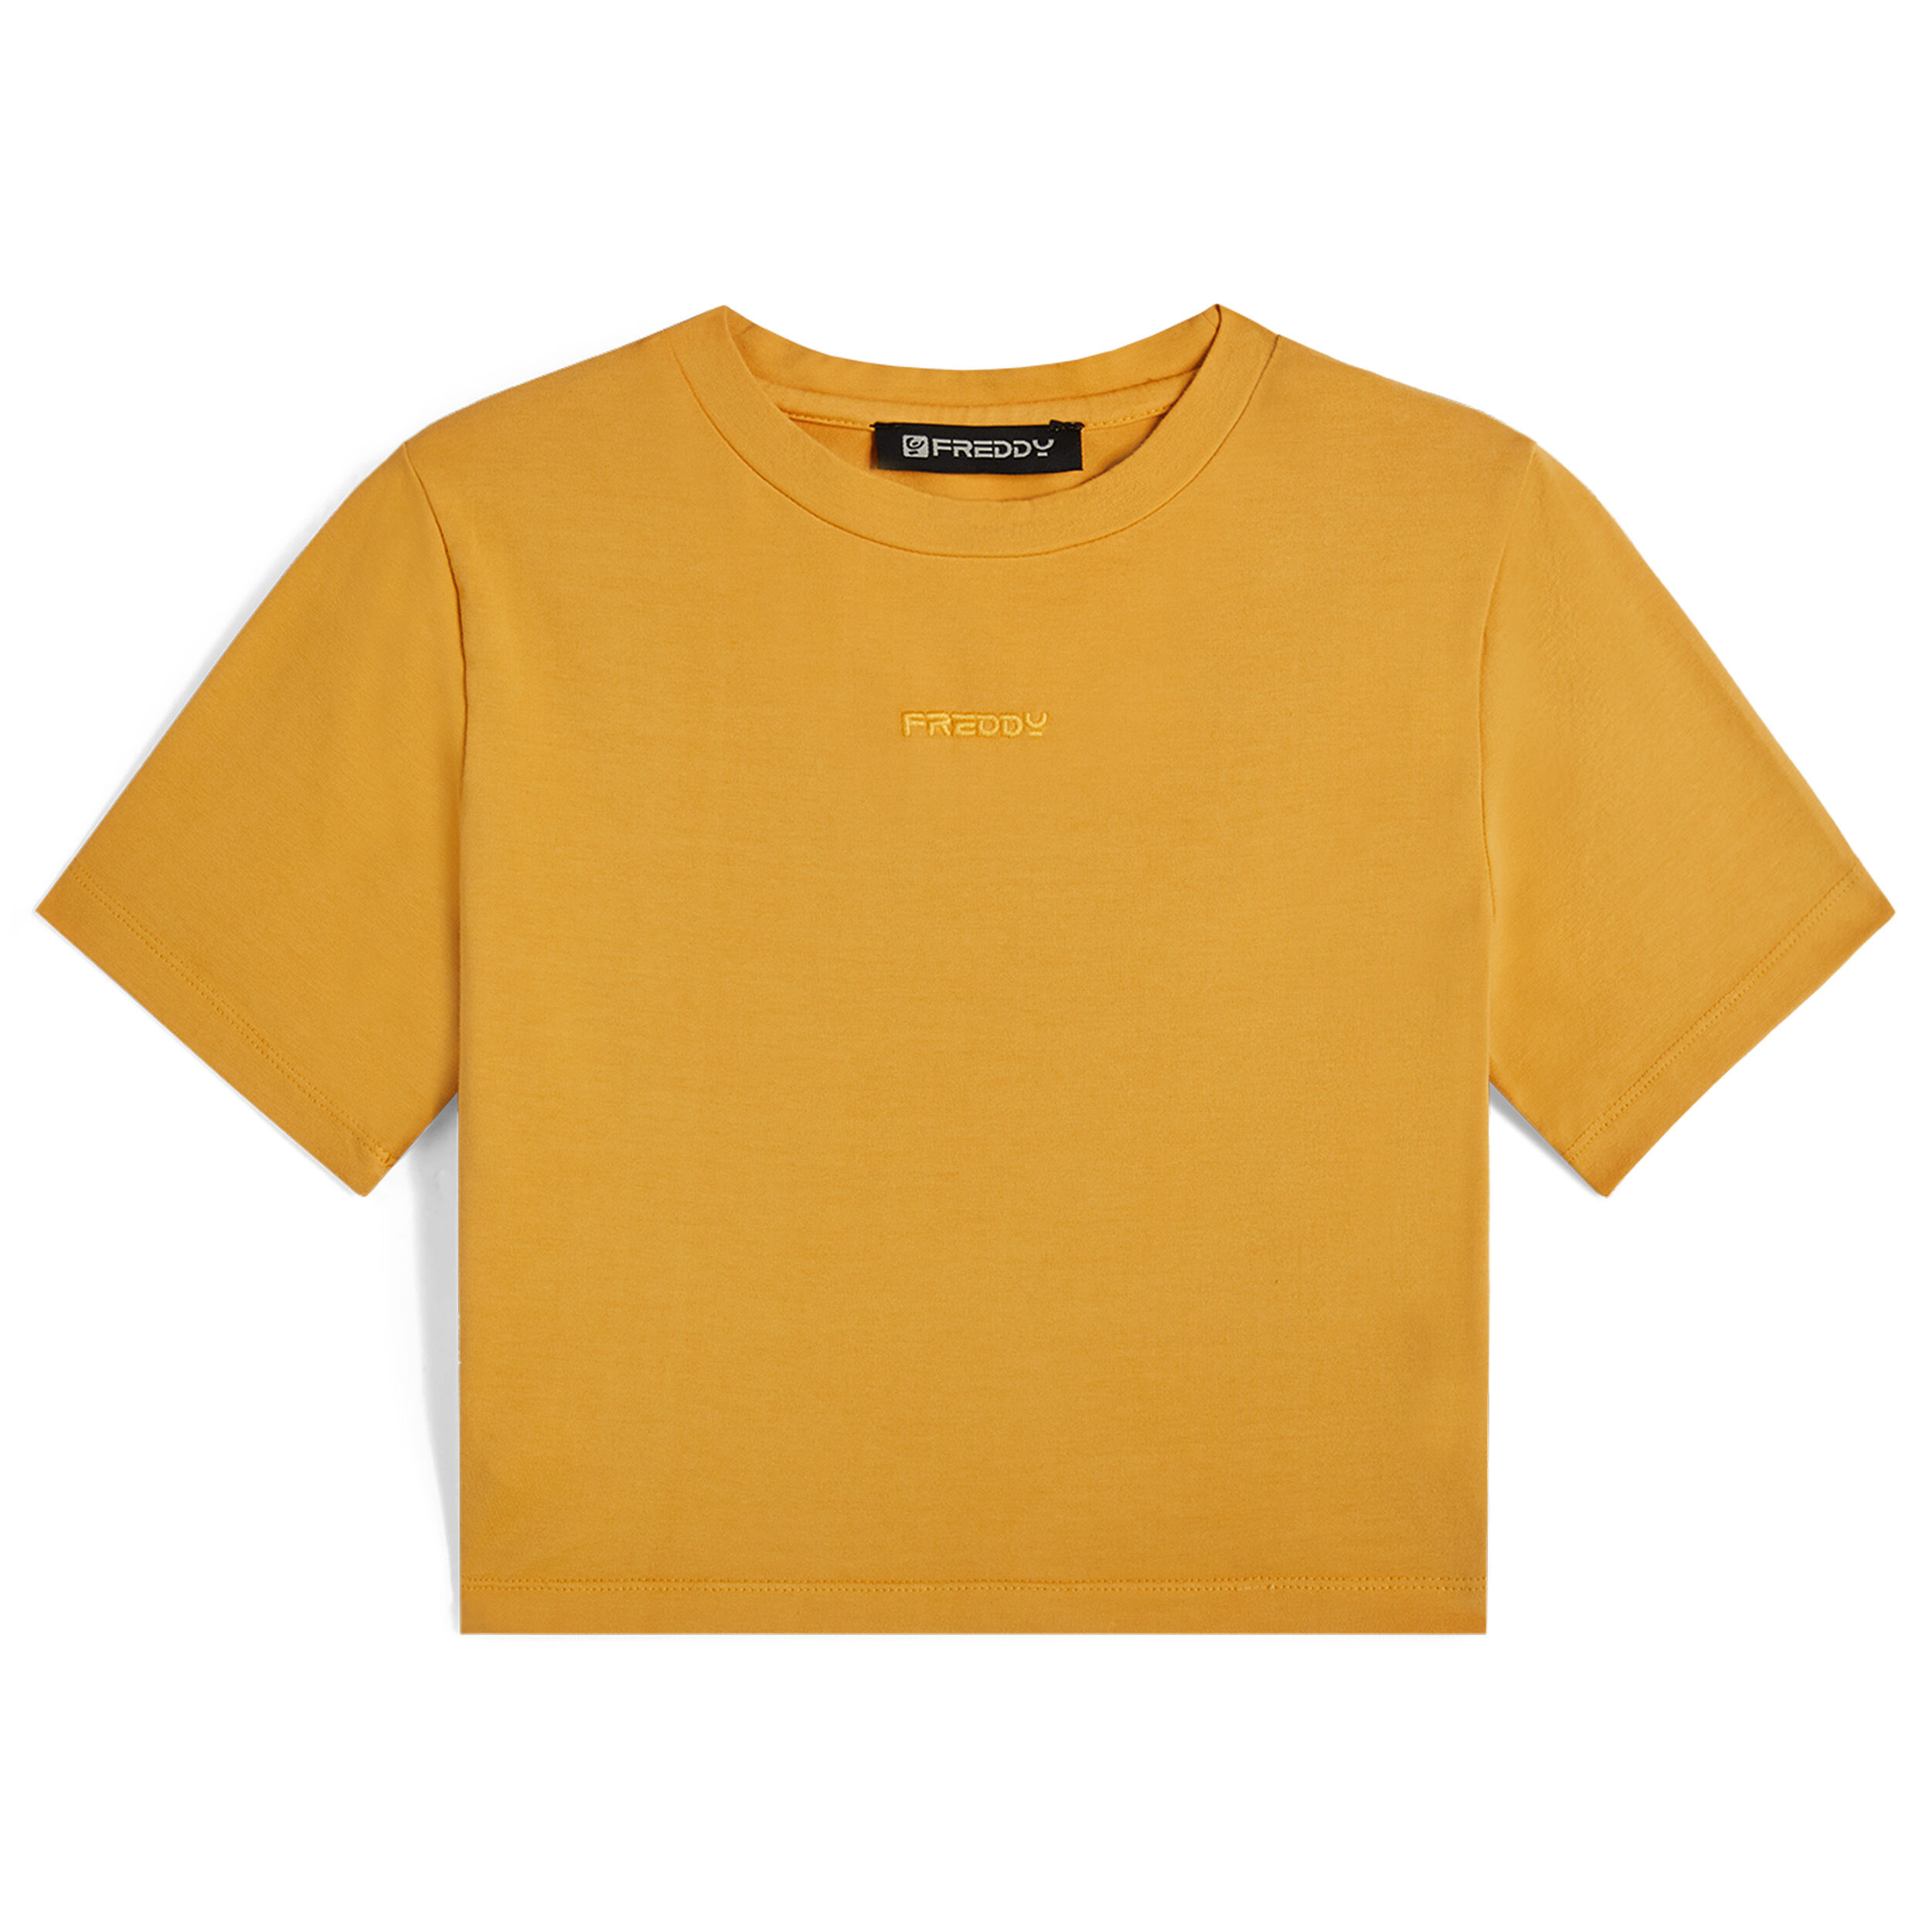 Freddy T-shirt slim fit corta in tessuto jersey tinto capo Golden Apricot Direct Dyed Donna Large